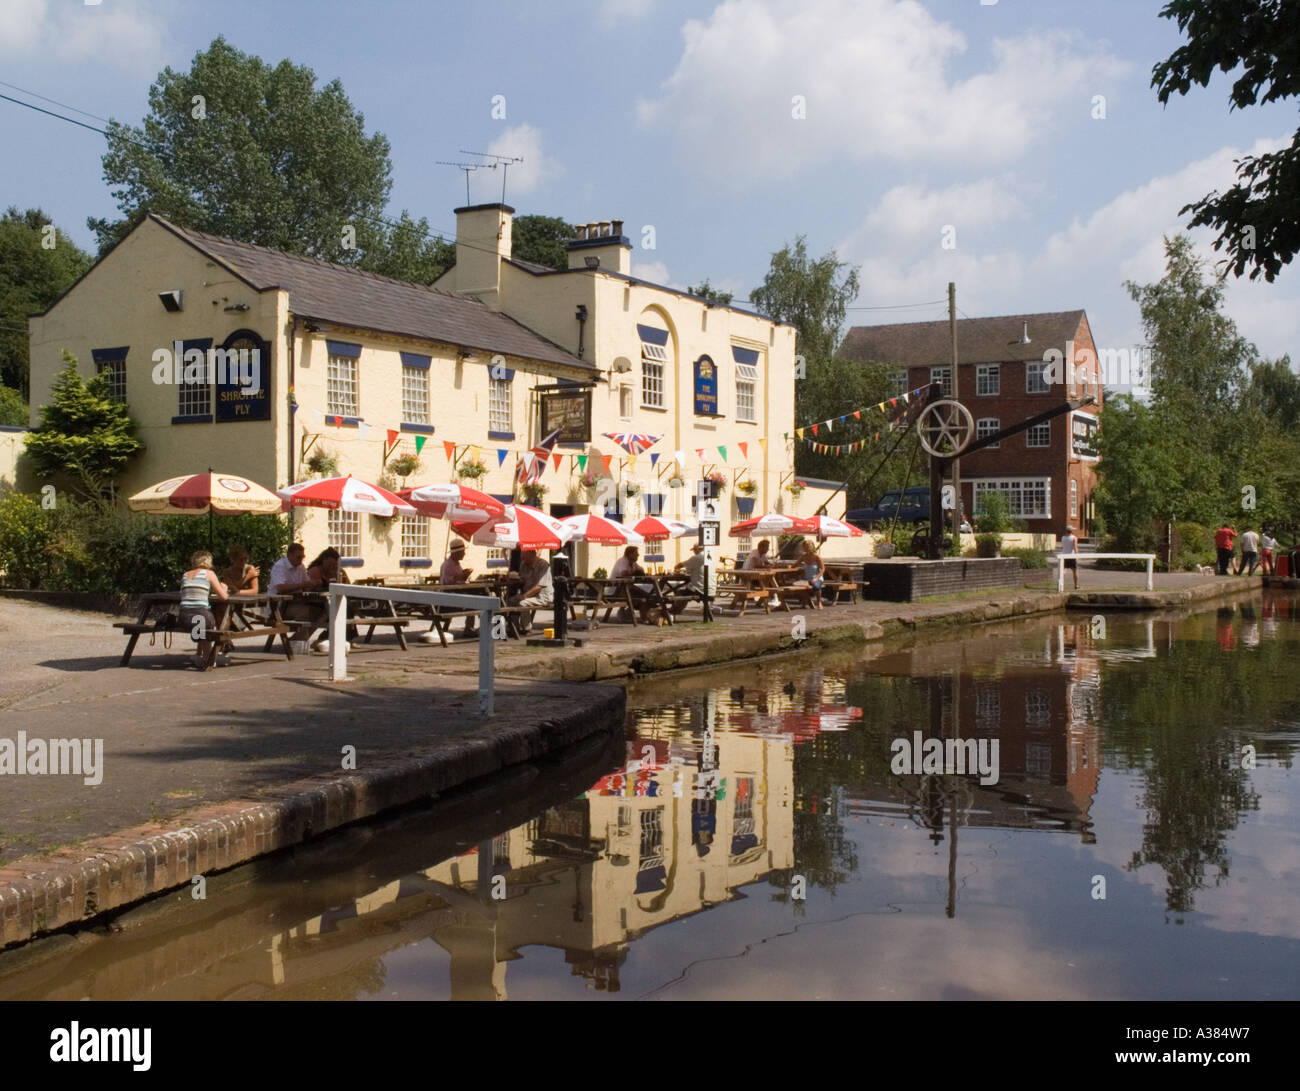 THE SHROPPIE FLY PUBLIC HOUSE on the Shropshire Union Canal wharf in Audlem Cheshire England UK Britain Stock Photo